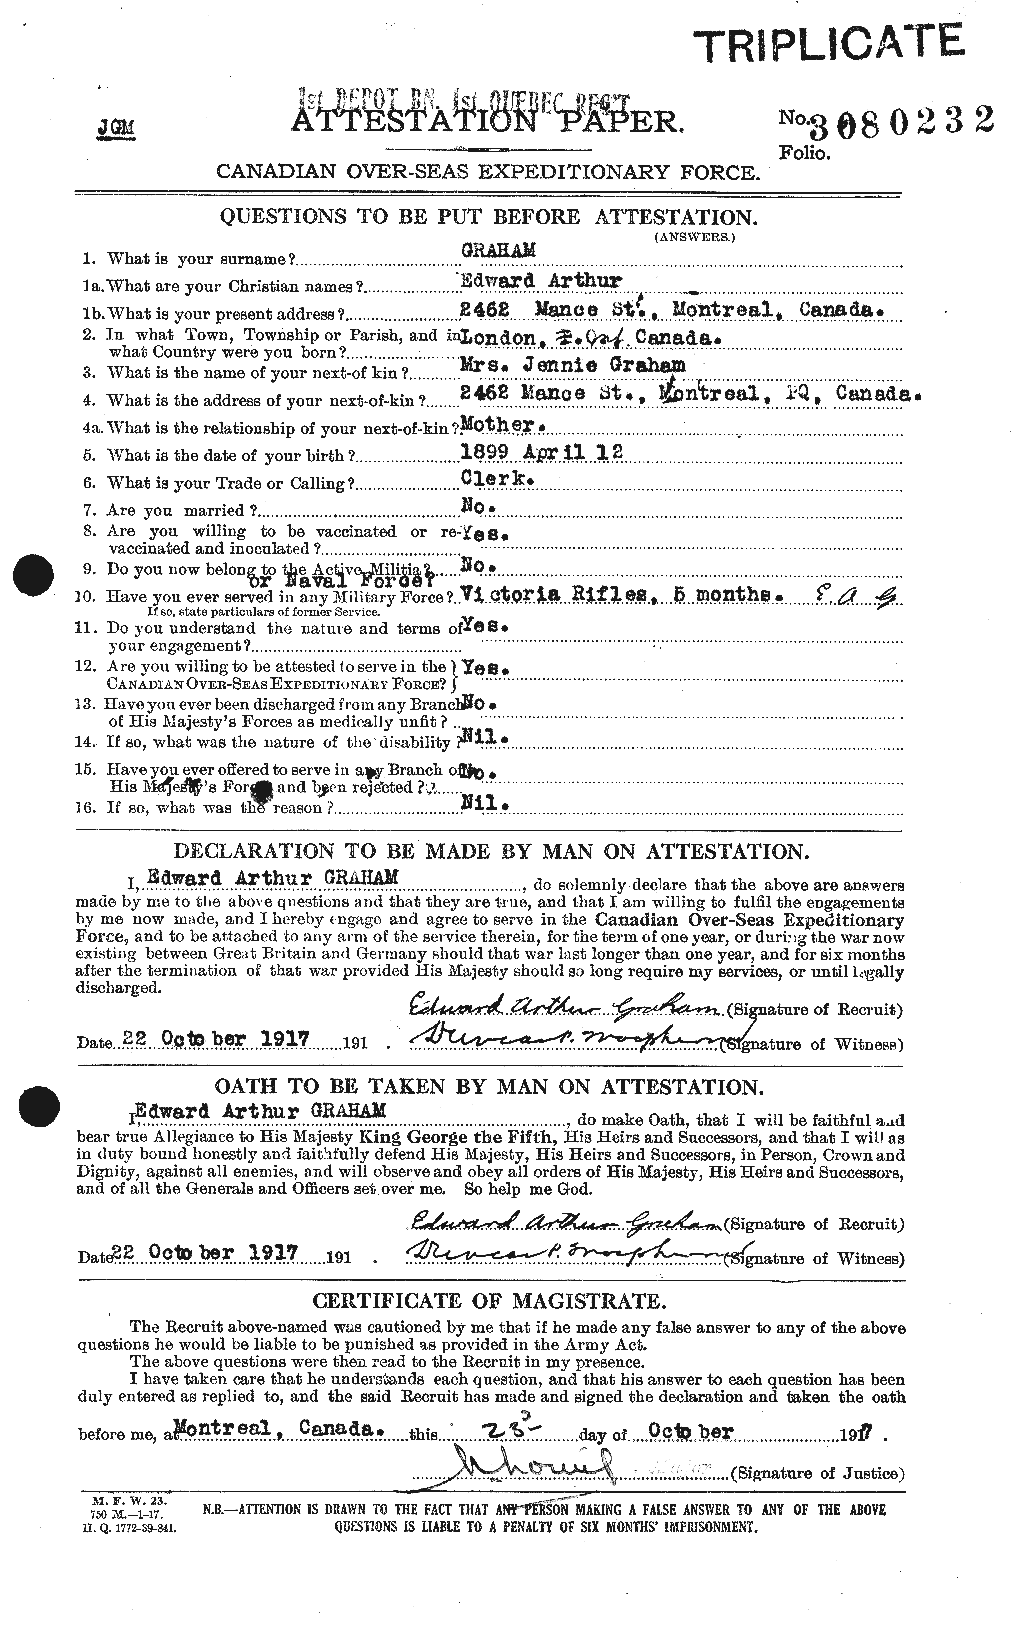 Personnel Records of the First World War - CEF 353866a